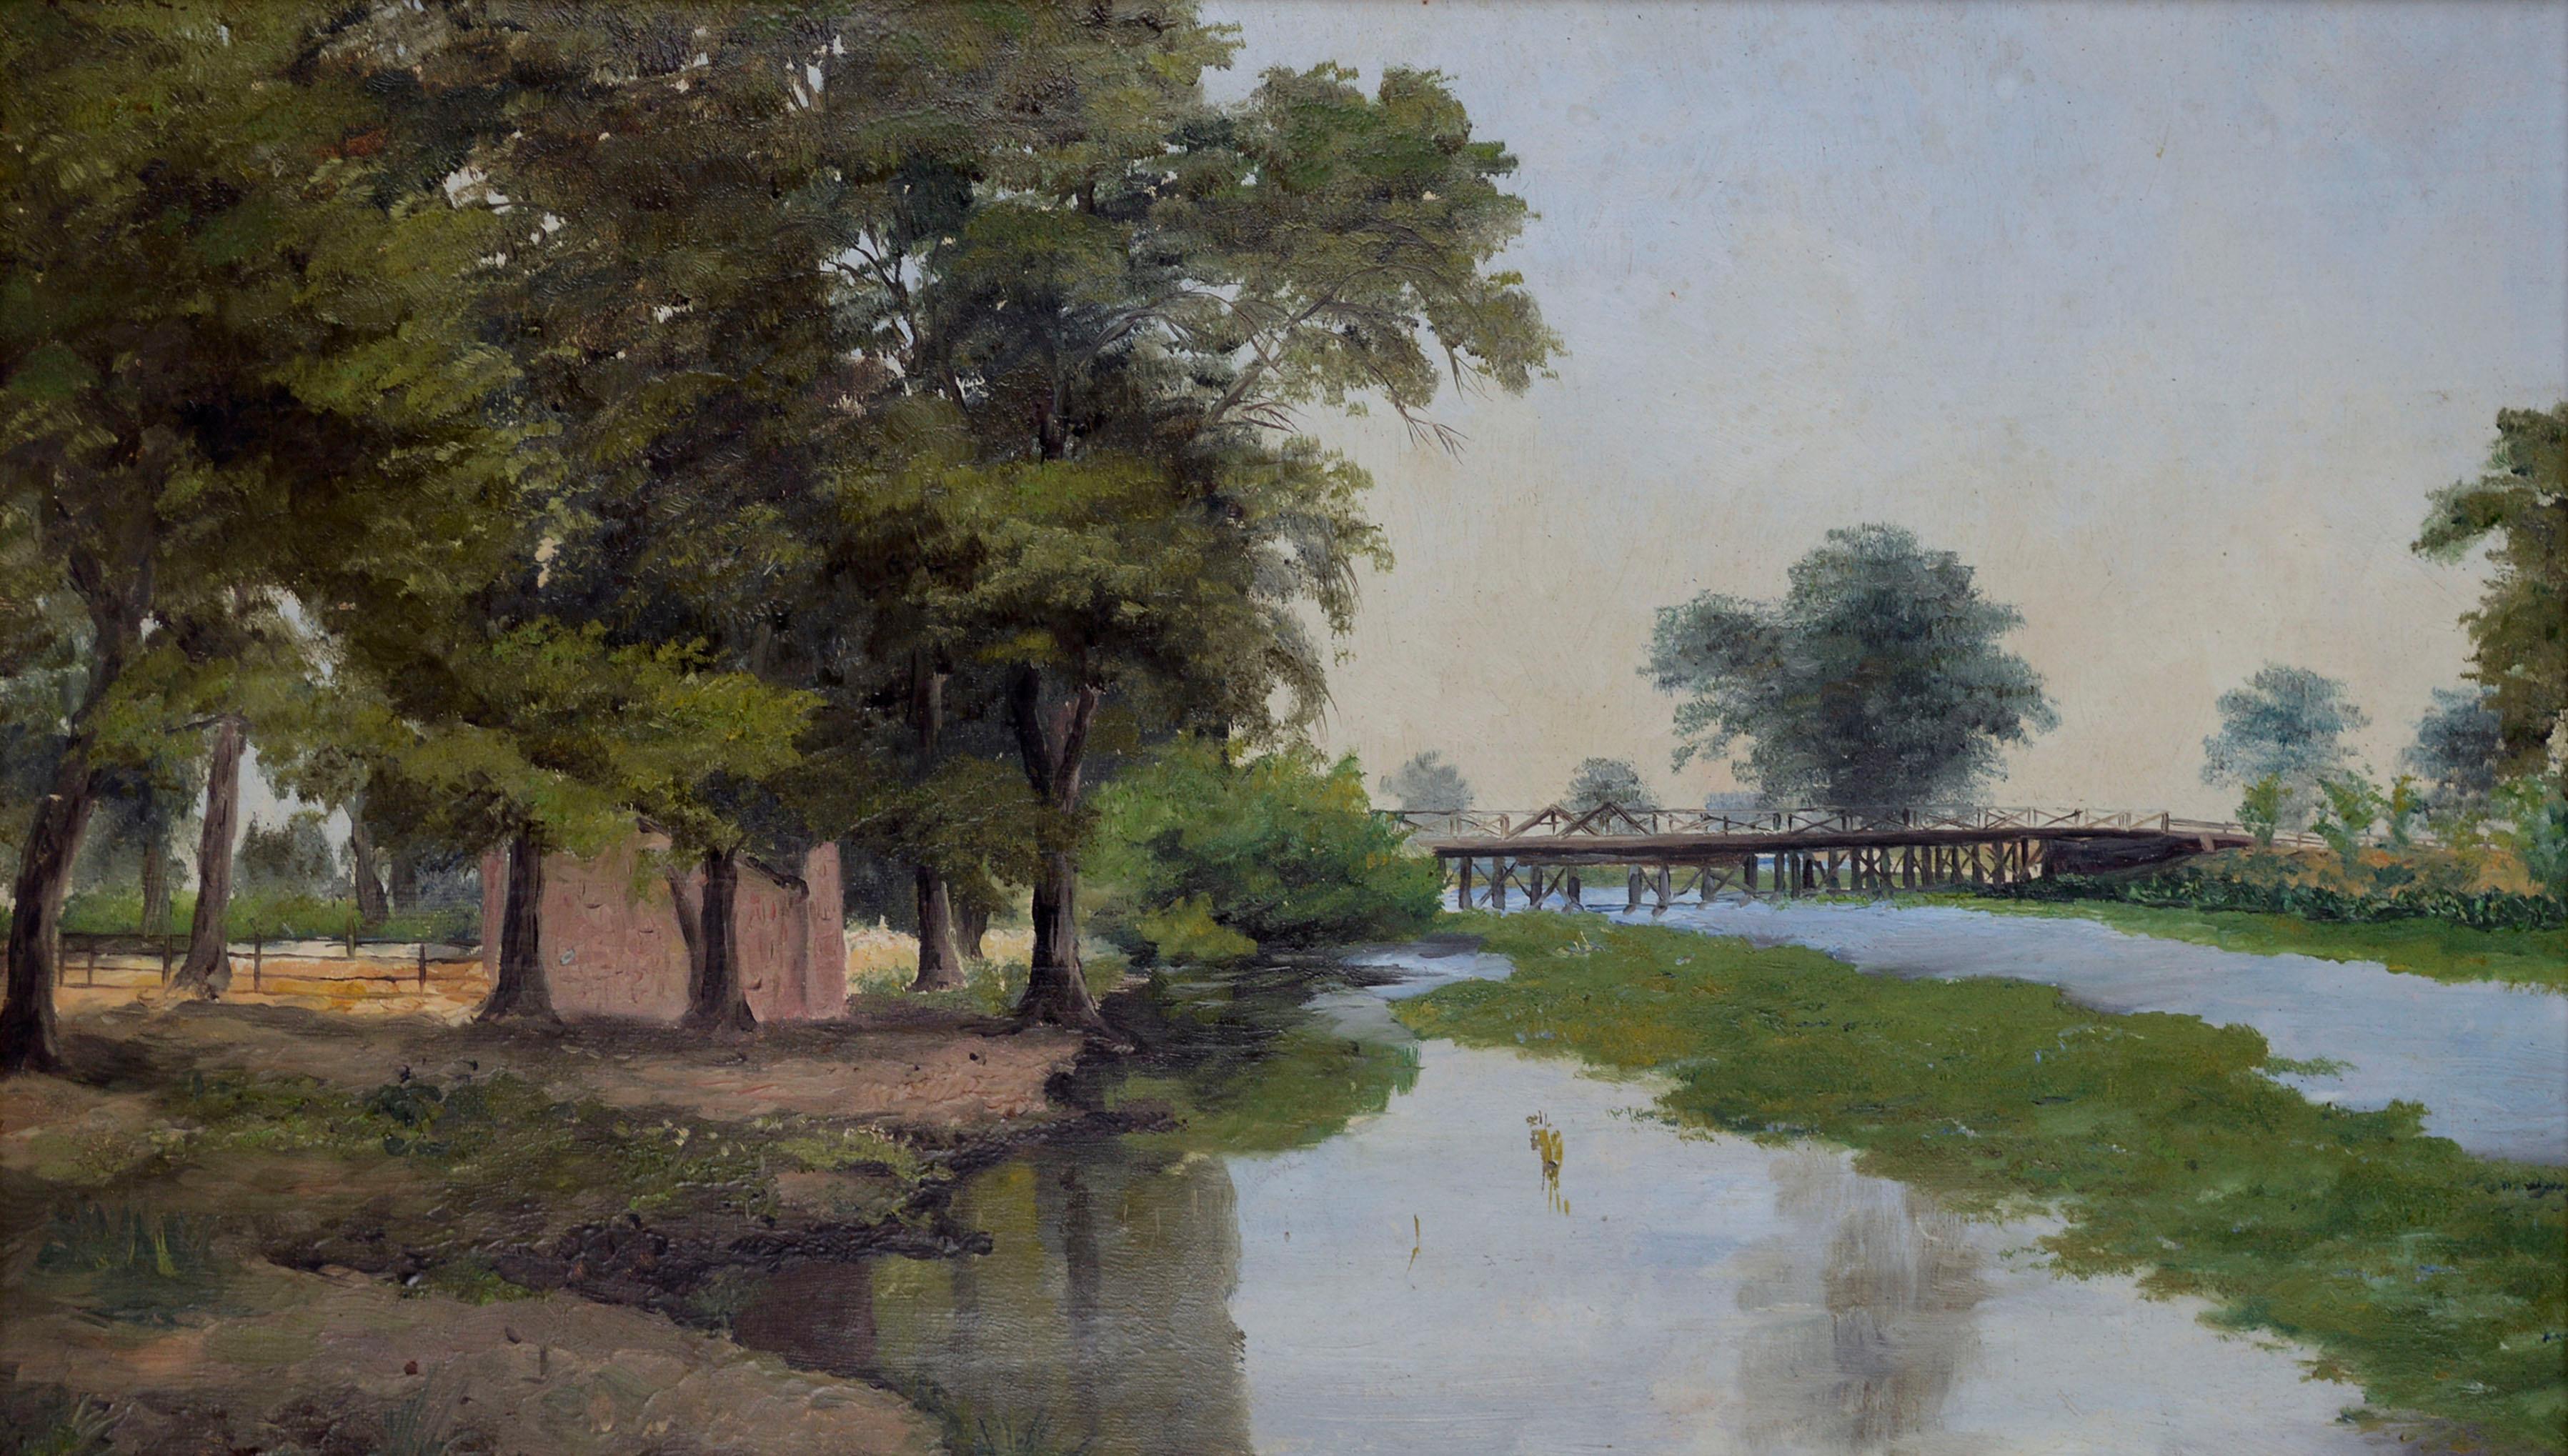 Early 20th Century Bay Area California Landscape with Bridge  - Painting by Florence Bugbee Banham